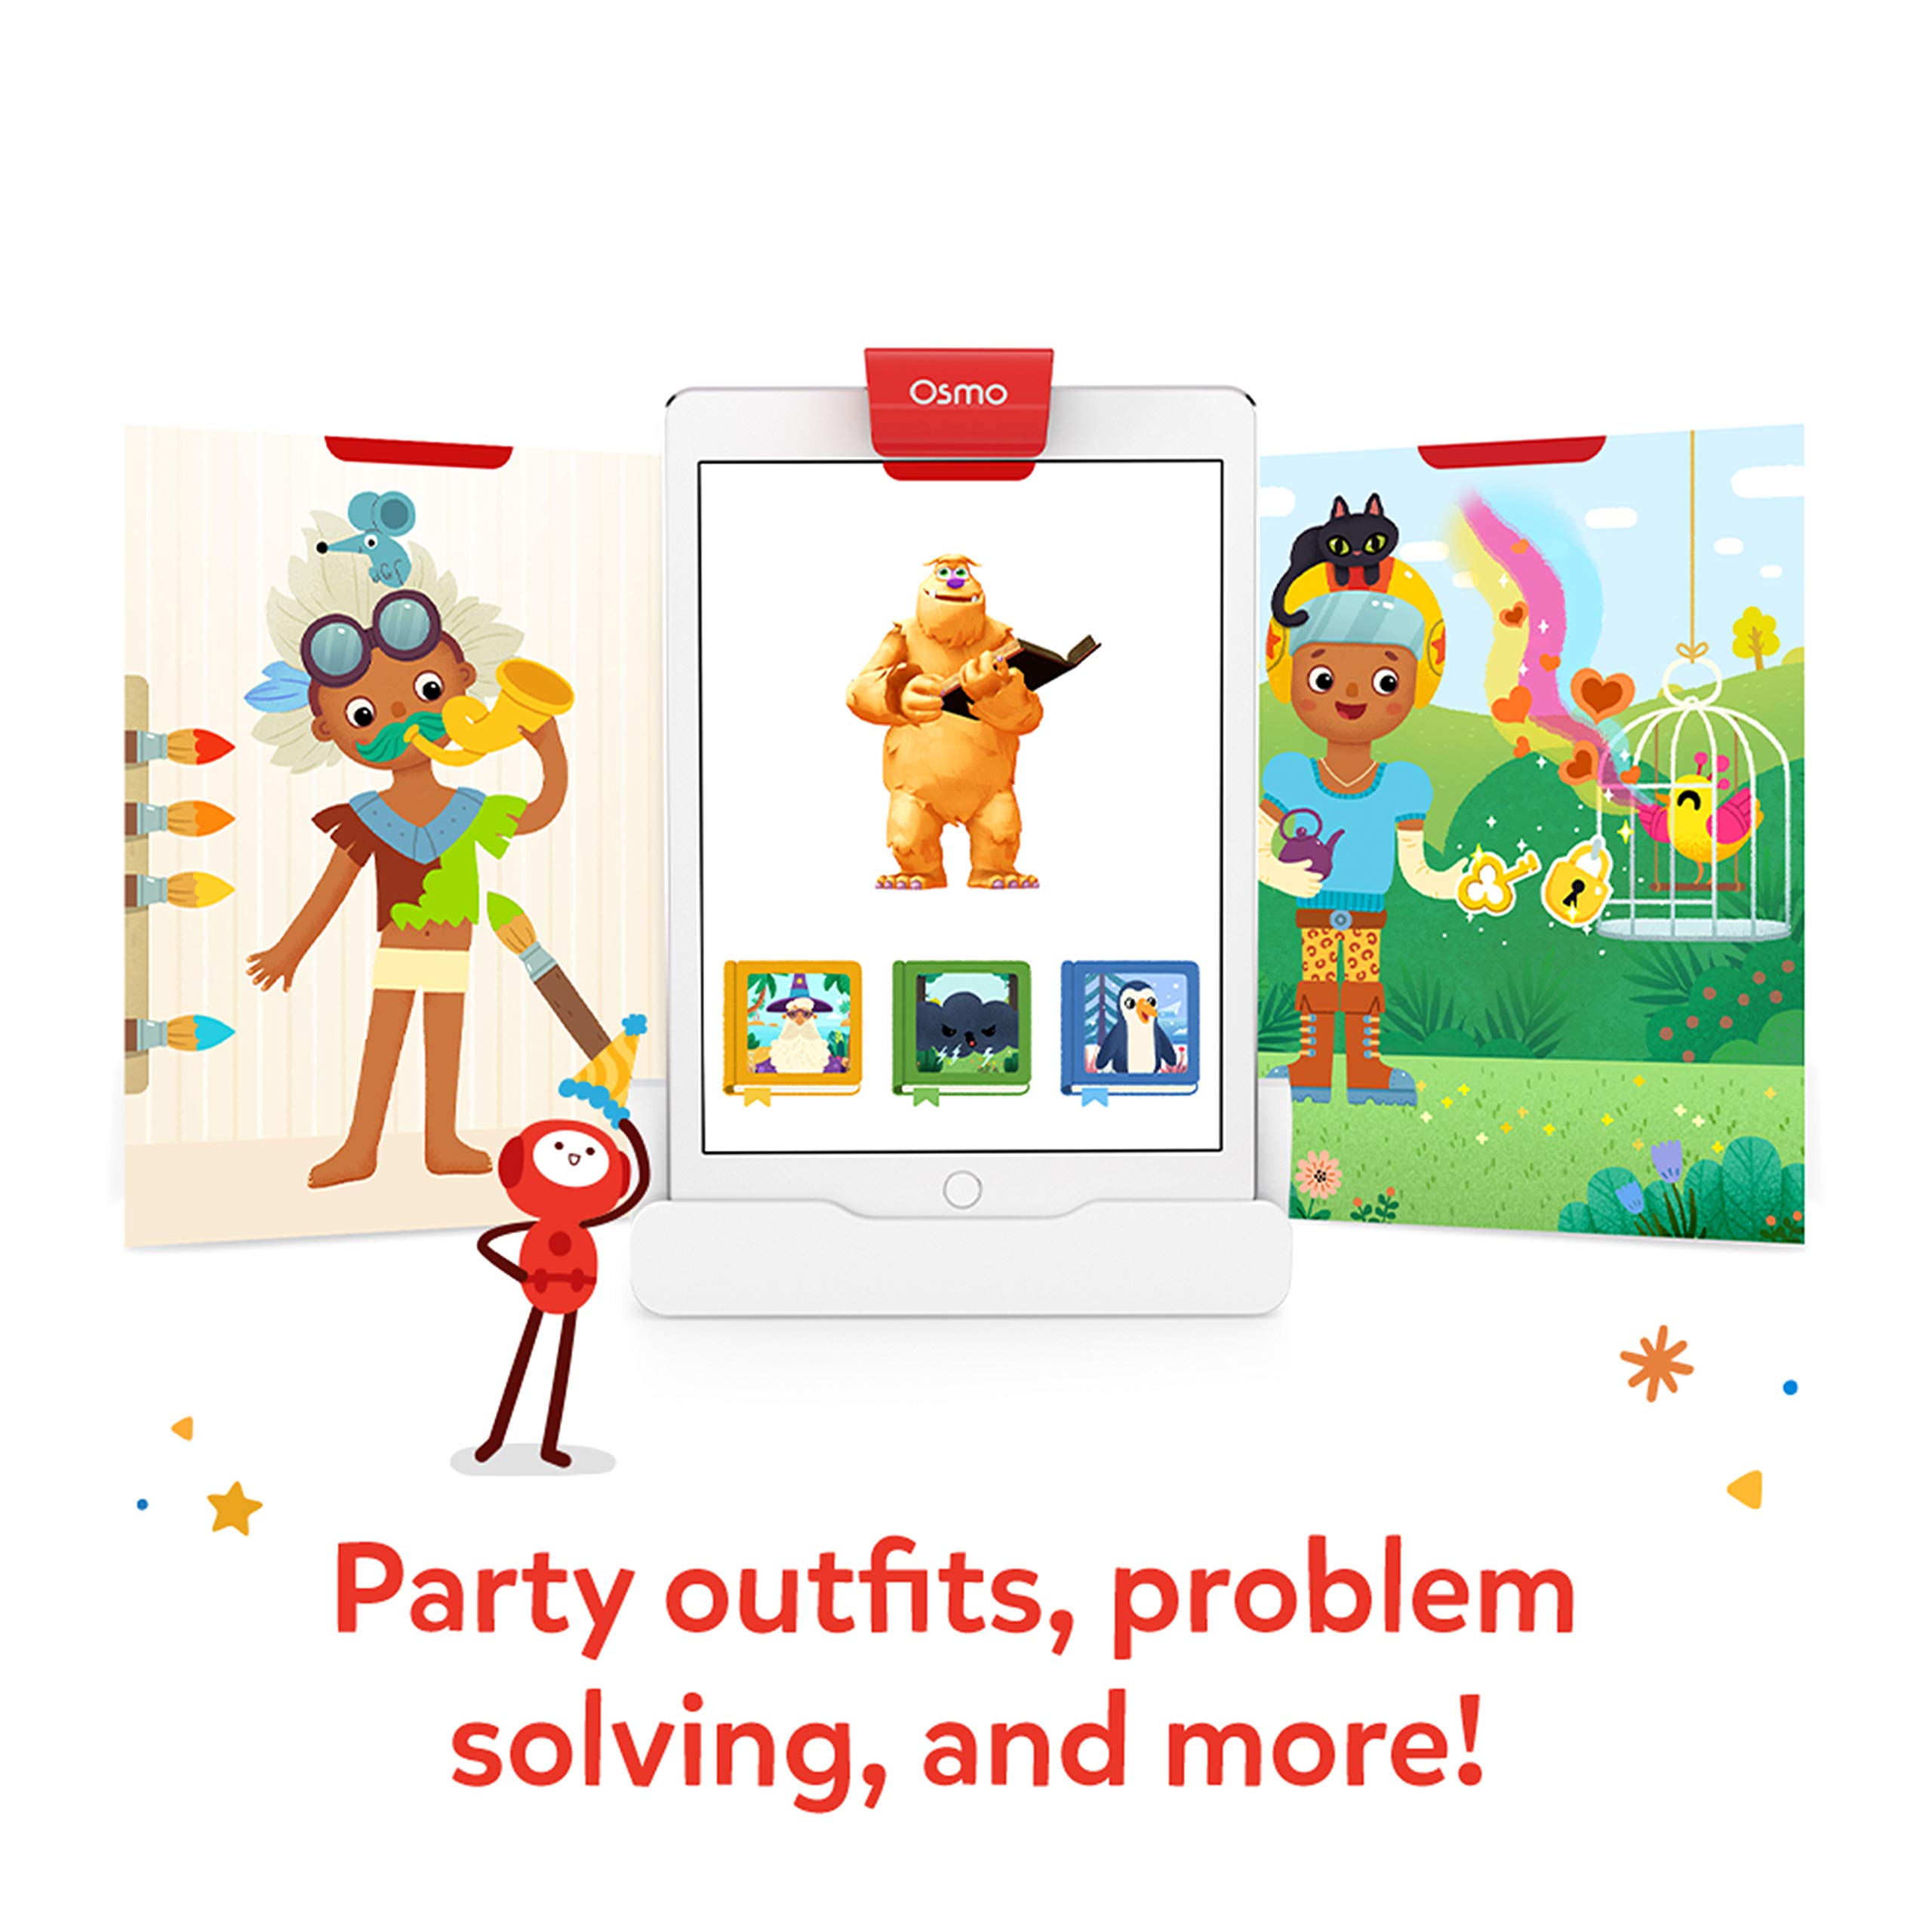 Osmo -Little Genius Costume Pieces-2 Educational Learning Games-Ages 3-5-Stories & Creativity-For iPad or Fire Tablet-STEM Toy Gifts for Kids,Boy&Girl-Ages 3 4 5(Osmo Base Required - Amazon Exclusive)